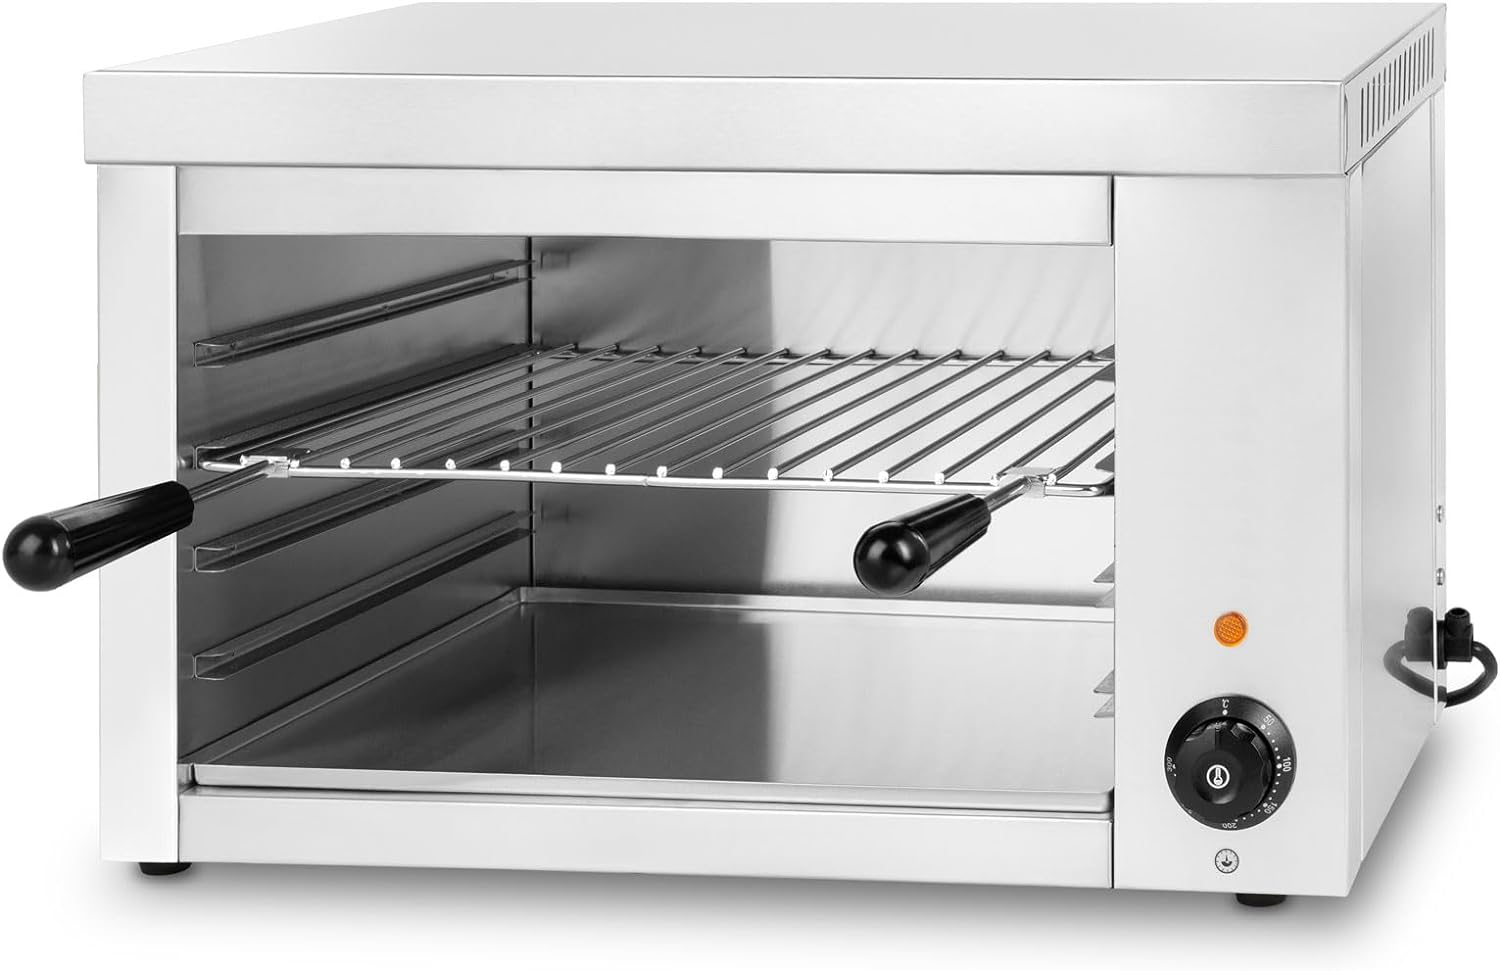 VERTES Salamander Grill, Height 390 mm, Adjustable 0-300 °C, 2200 Watt Catering Oven for Baking, Gratinating, Caramelising and Keeping Food Warm, Stainless Steel Housing, Multi Grill